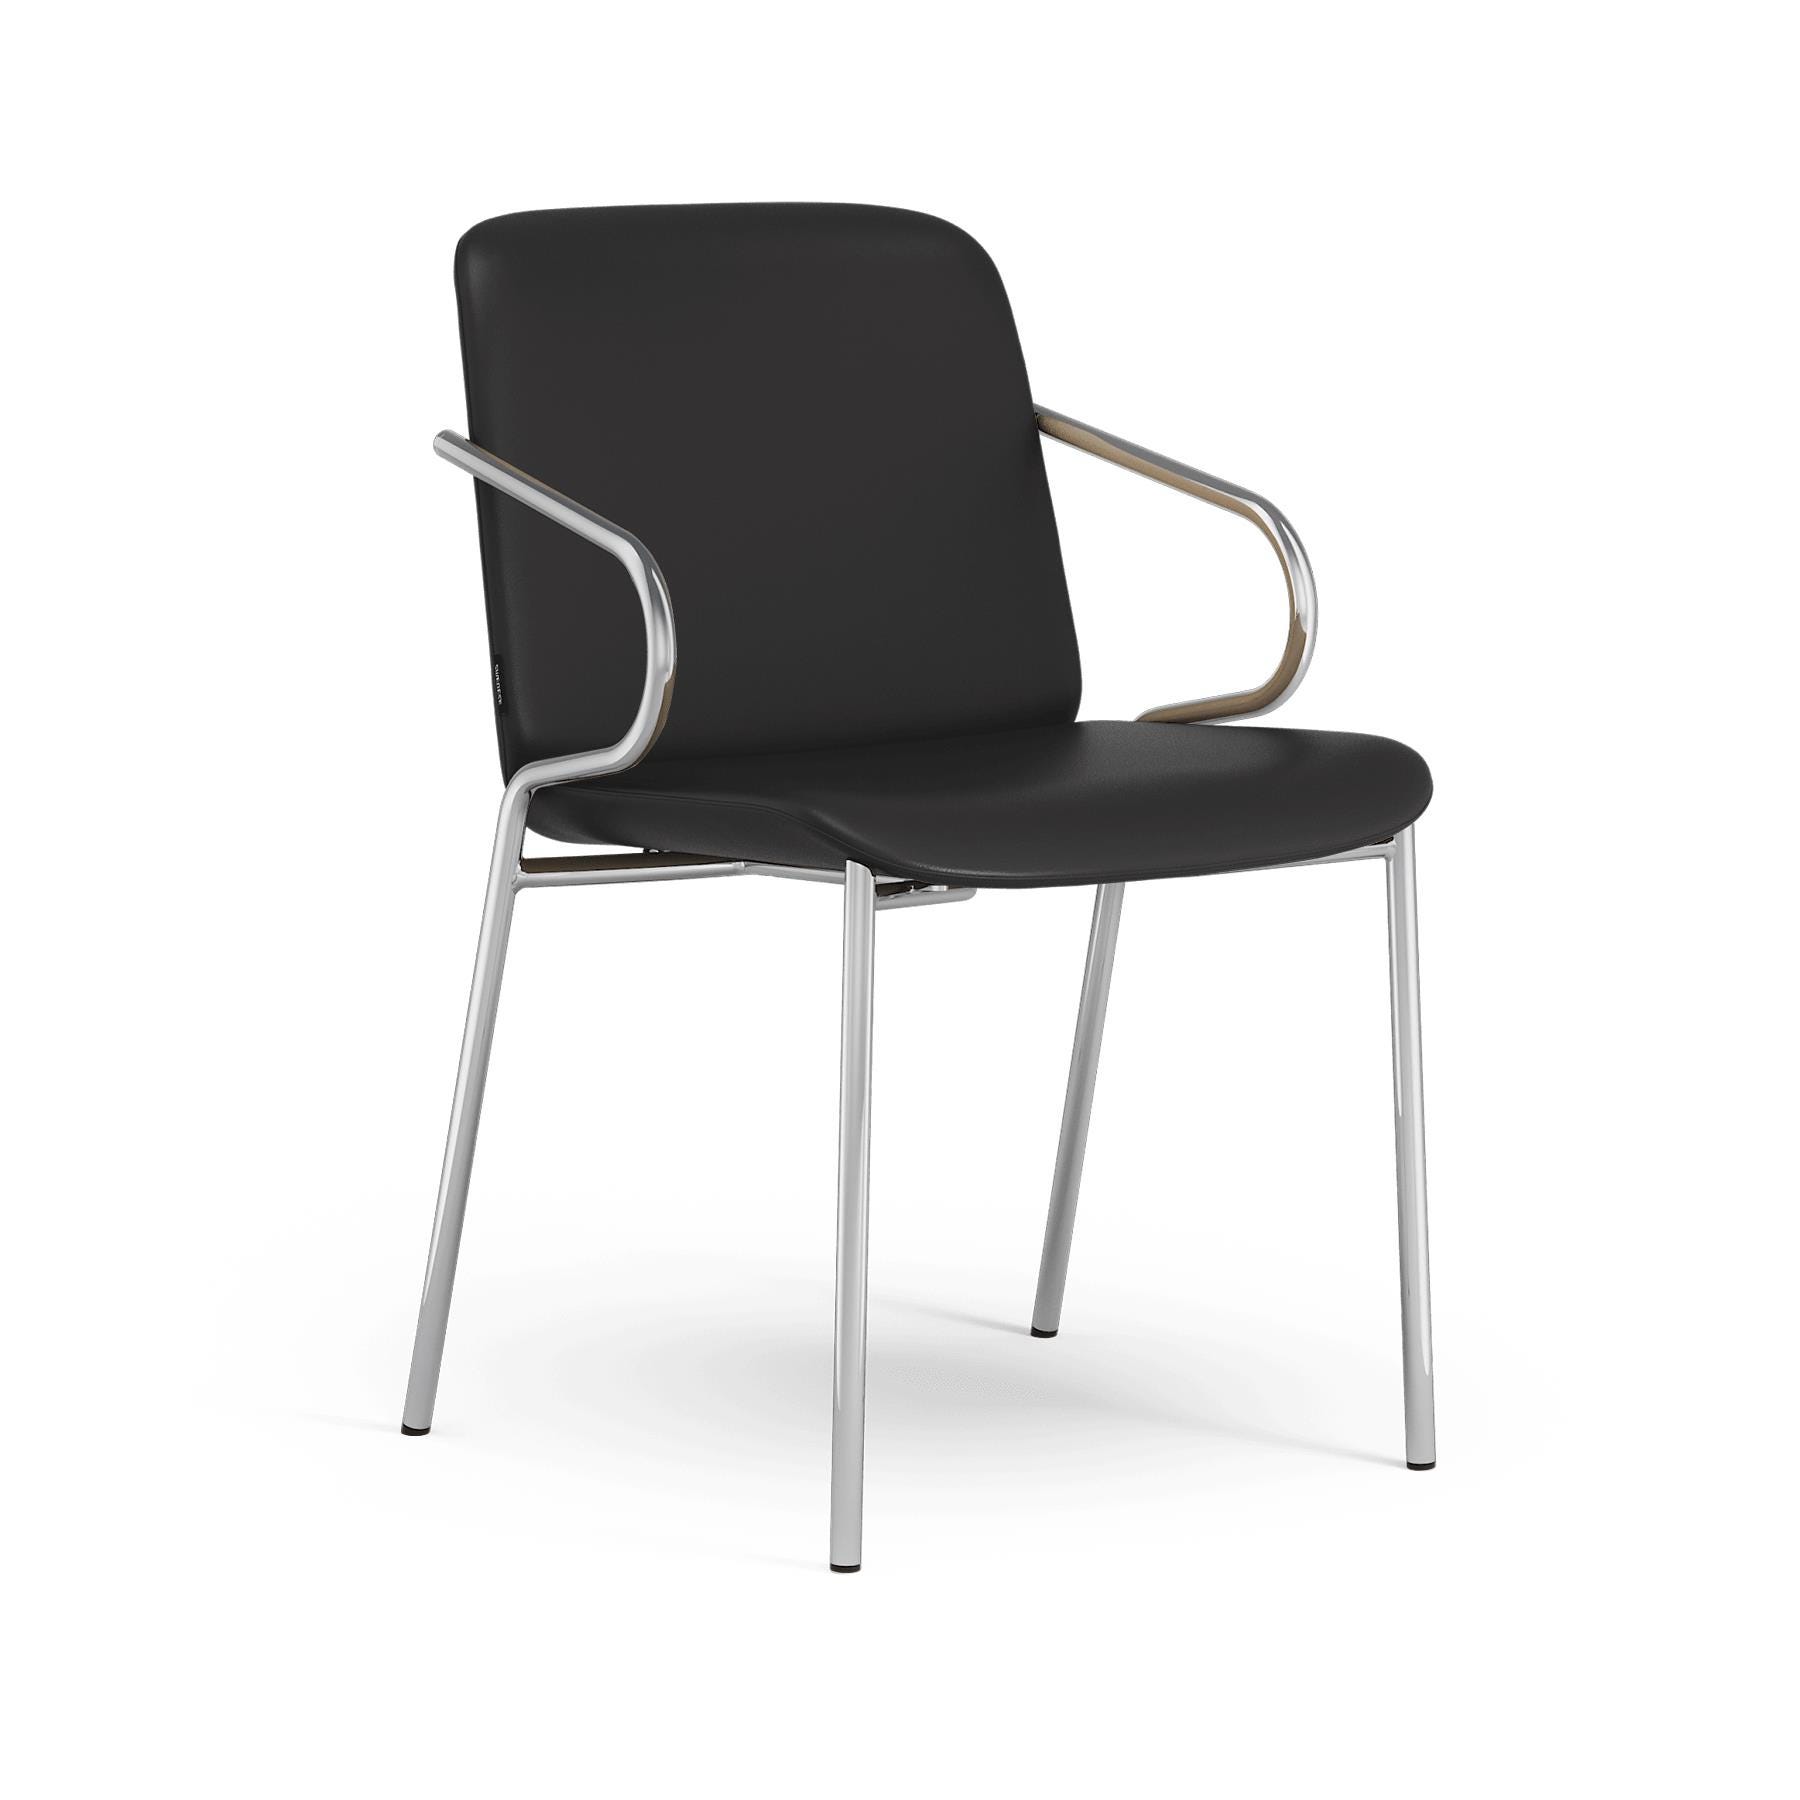 Swedese Amstelle Armchair Metal Frame Chrome Soft Black Leather Designer Furniture From Holloways Of Ludlow